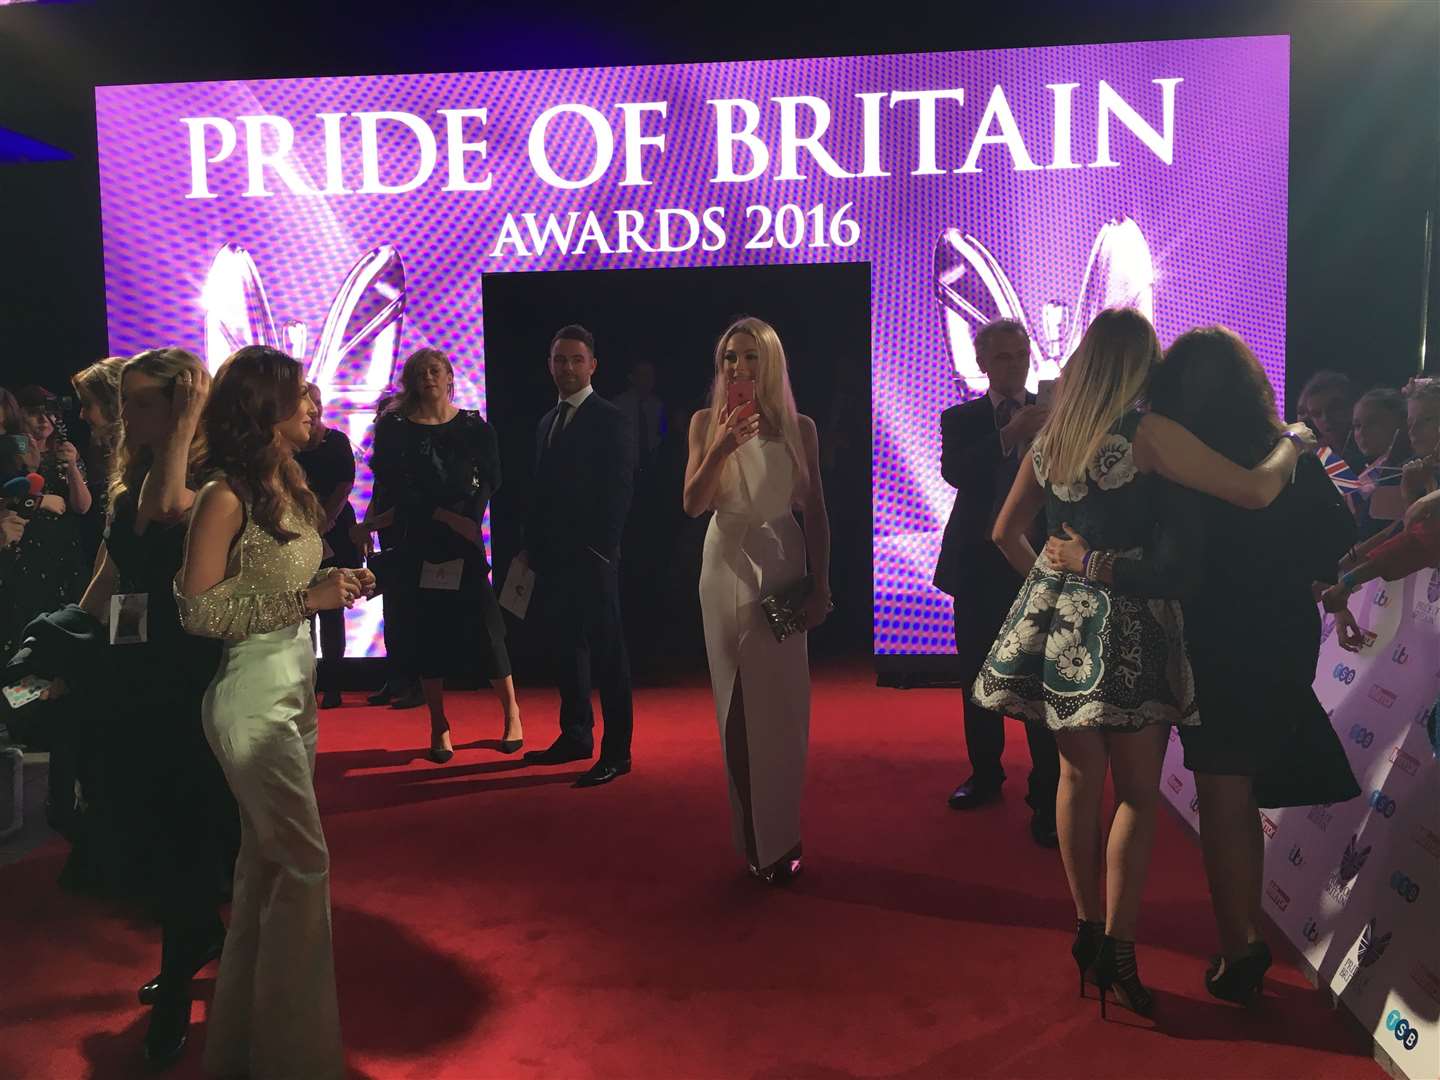 Shelby was nominated for a Pride of Britain award in 2016